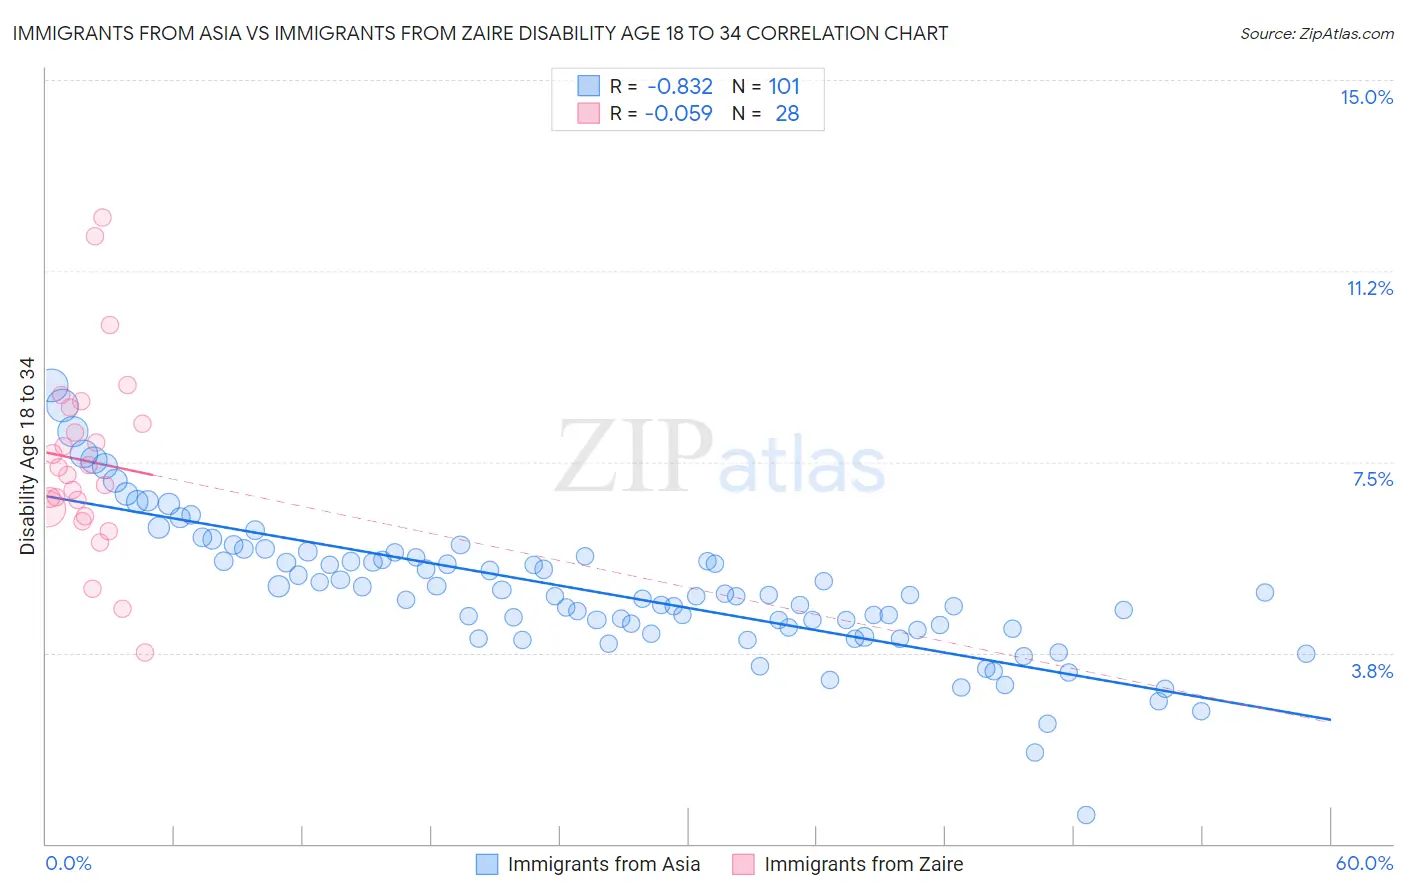 Immigrants from Asia vs Immigrants from Zaire Disability Age 18 to 34